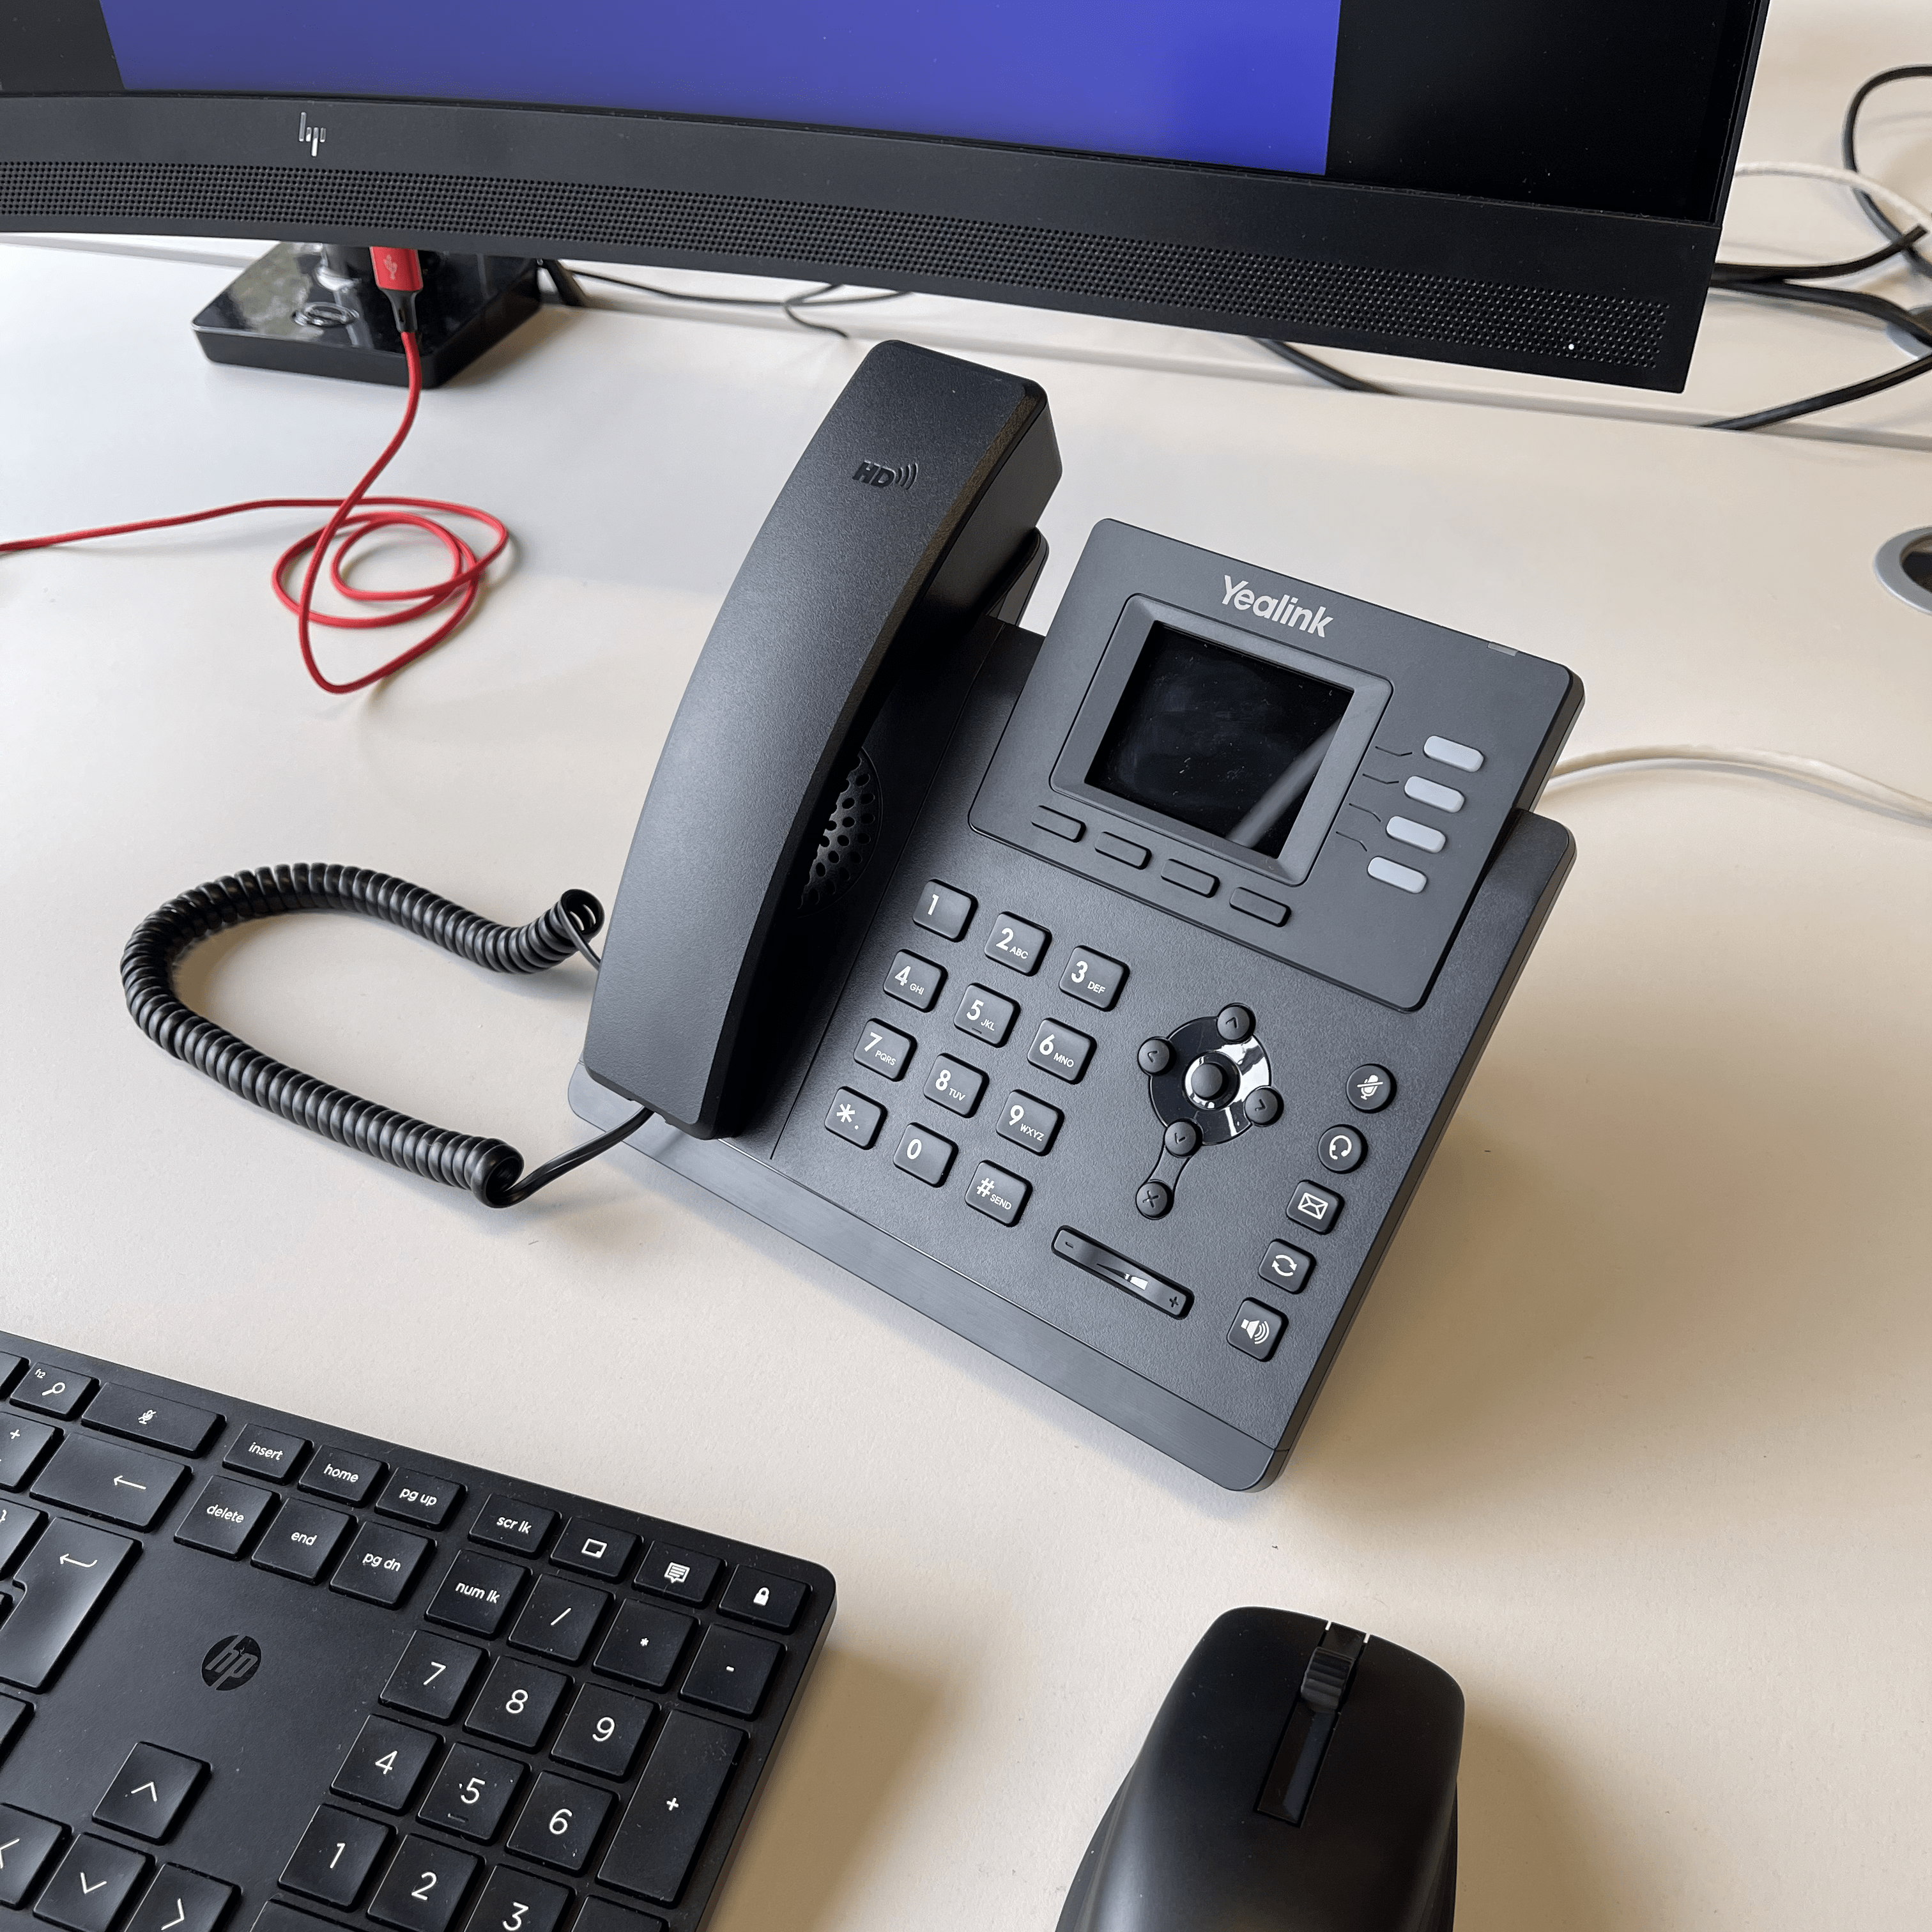 A Yealink telephone on a desk.